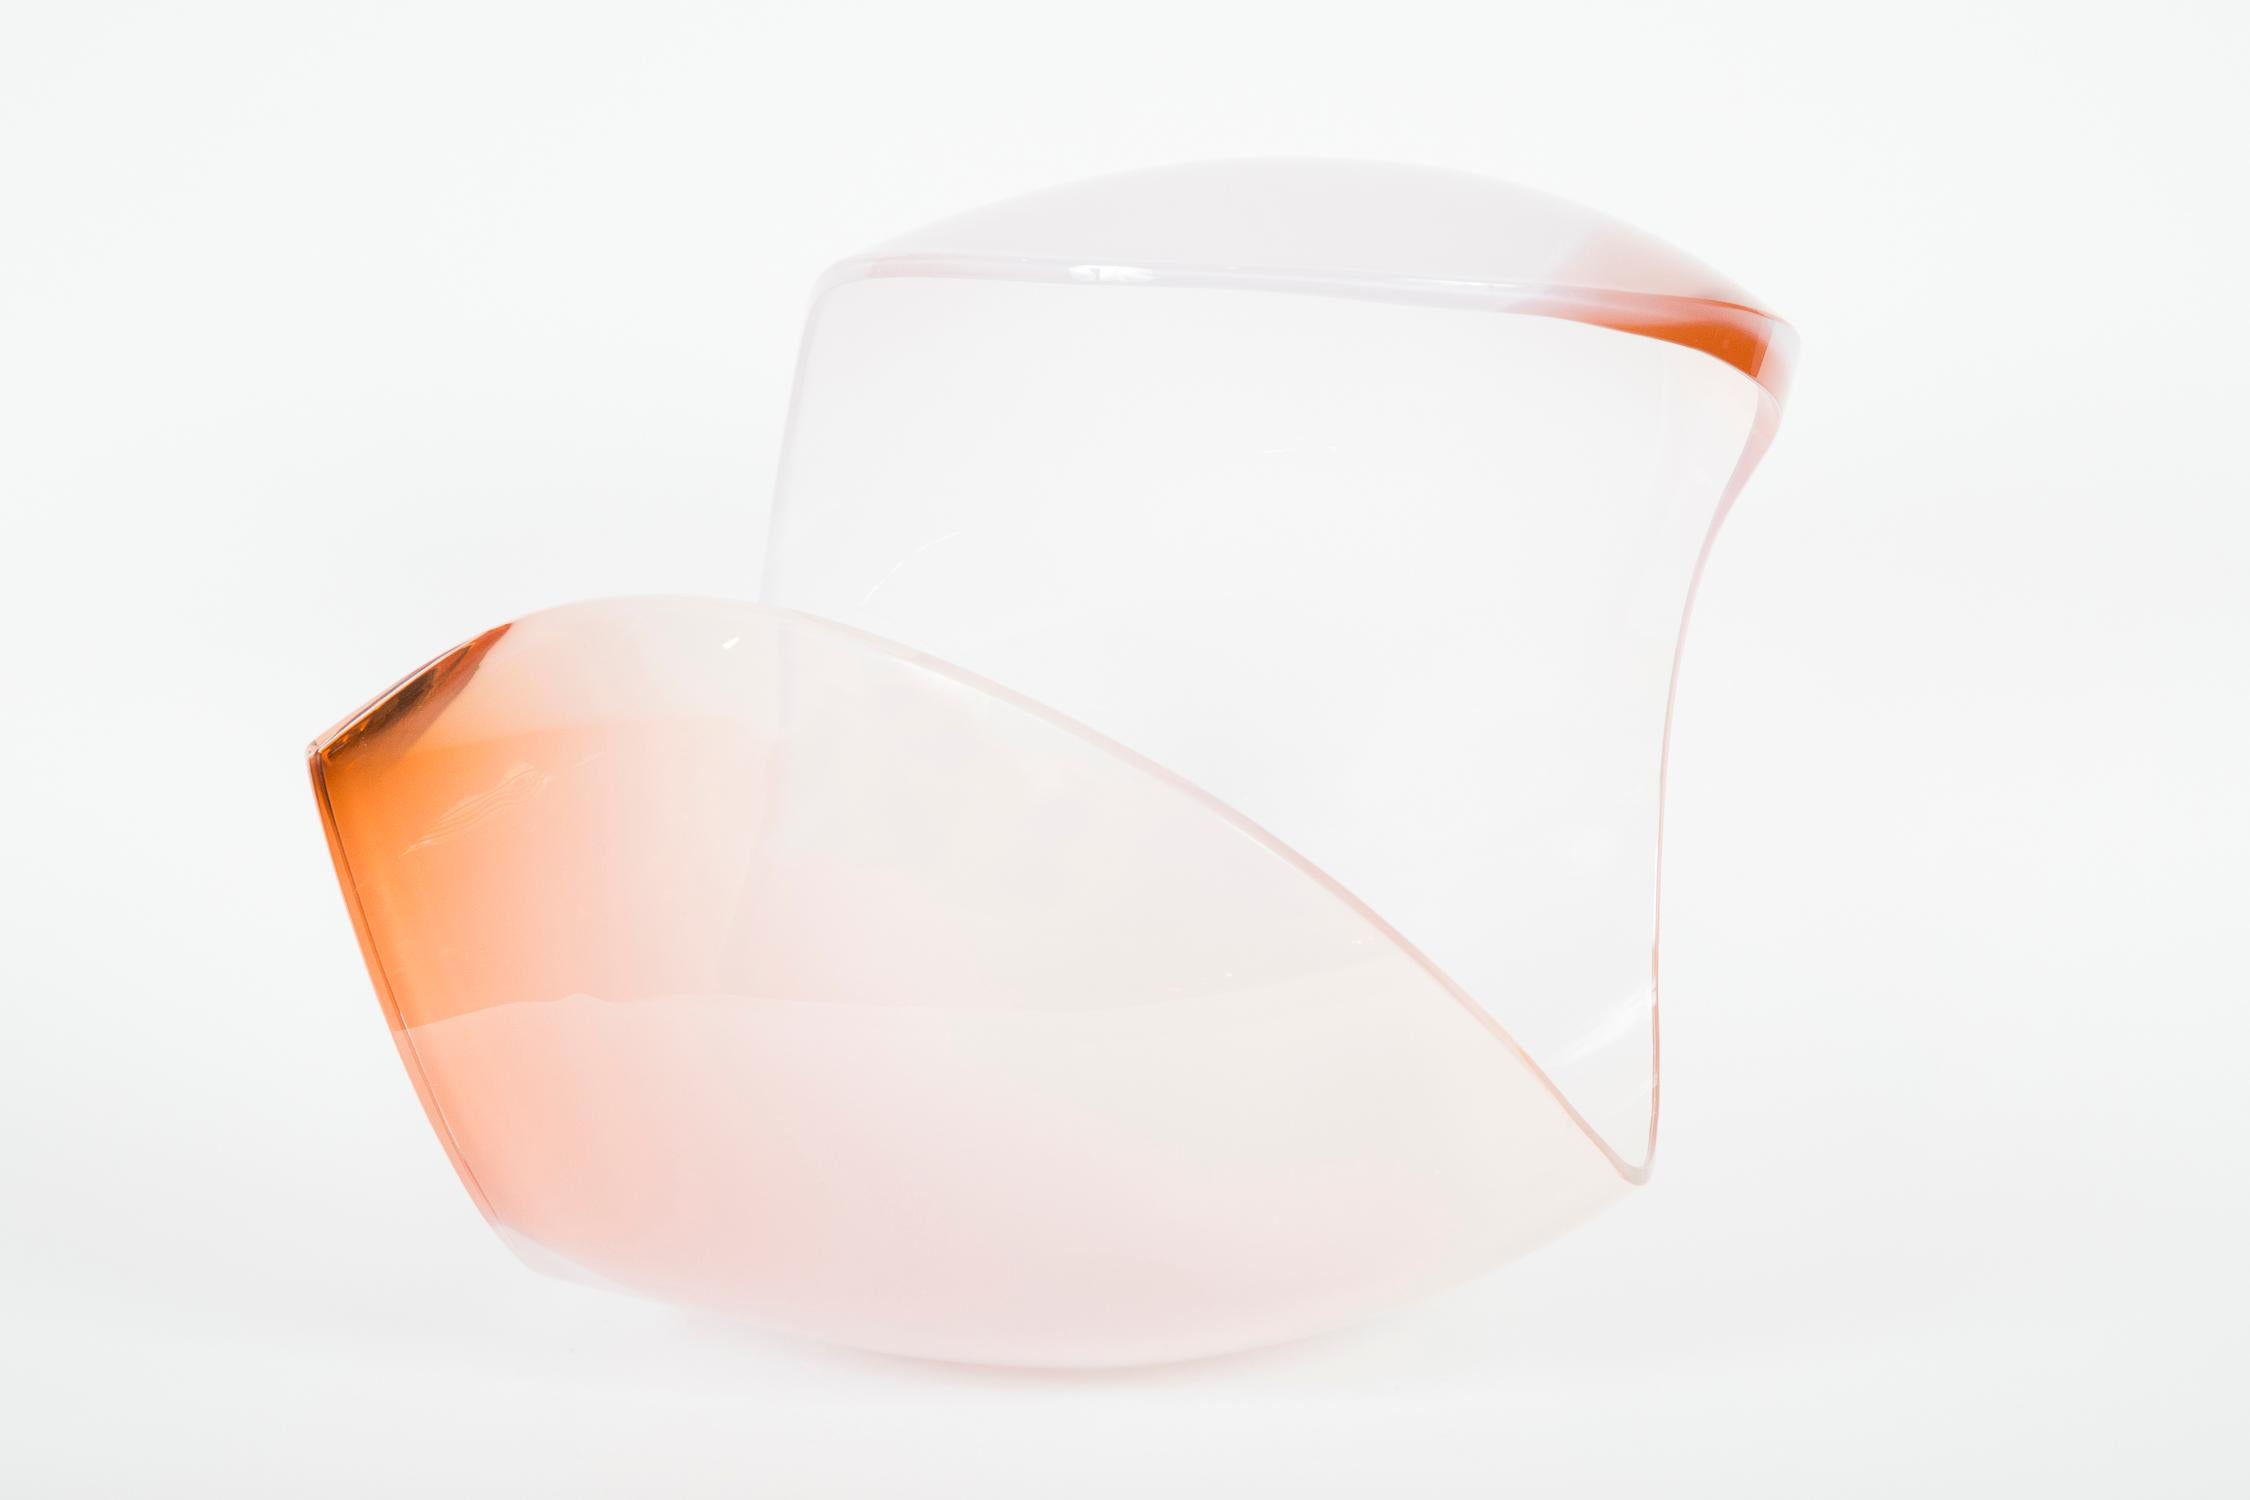 Contemporary Planet in White & Apricot glass sculpture and centrepiece by Lena Bergstrom